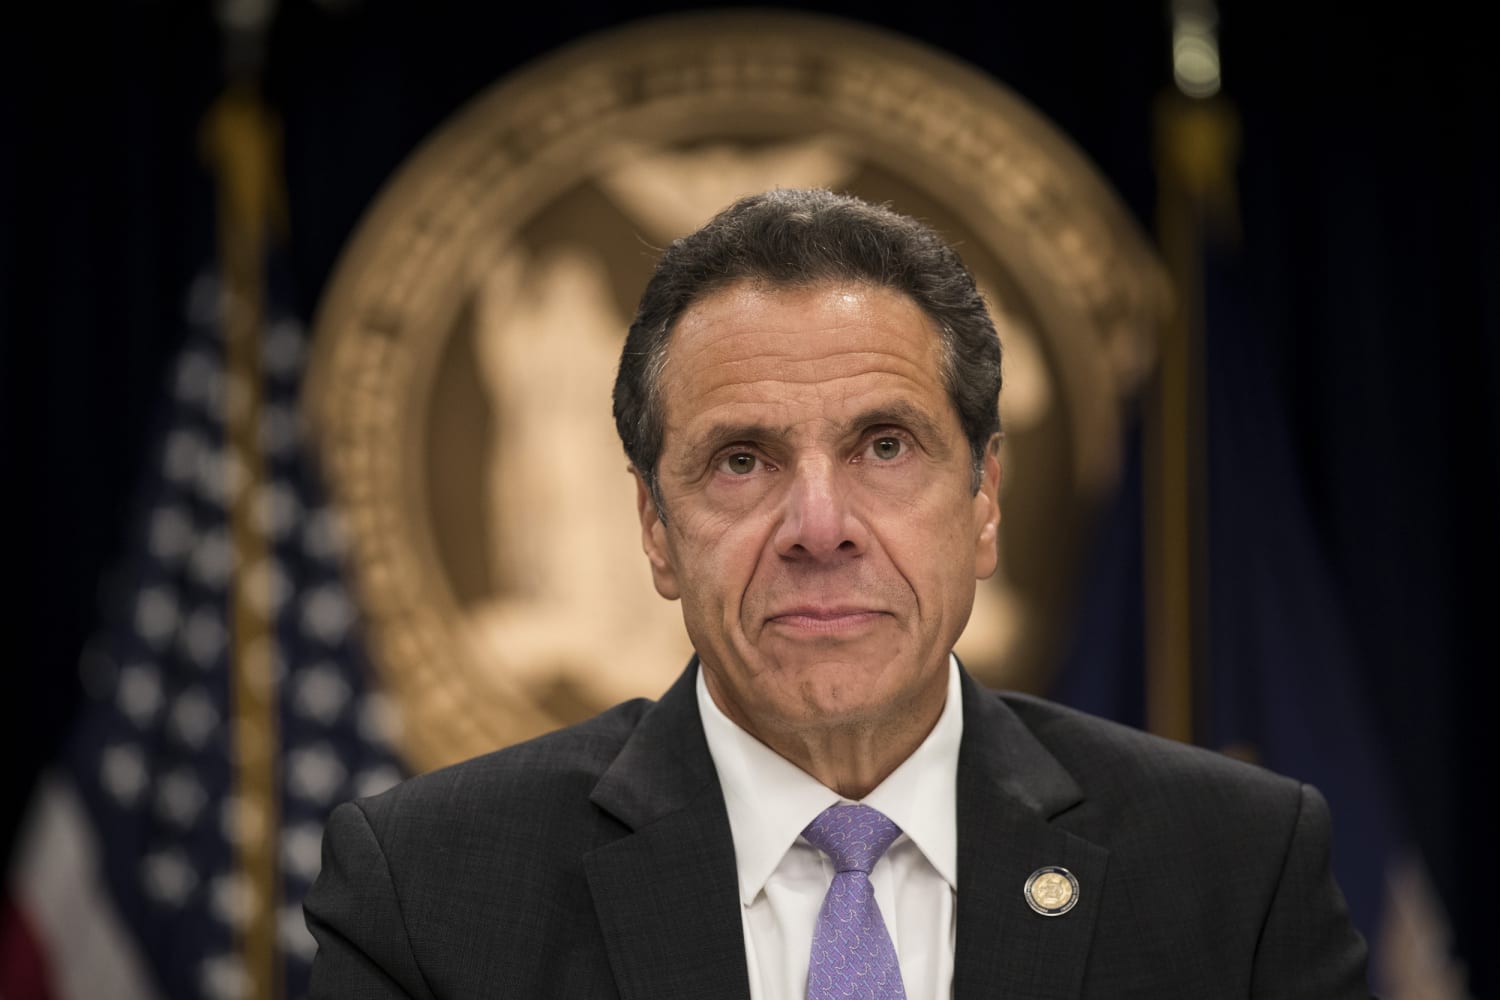 Cuomo’s conduct in office was ‘extremely disturbing,’ N.Y. Assembly finds